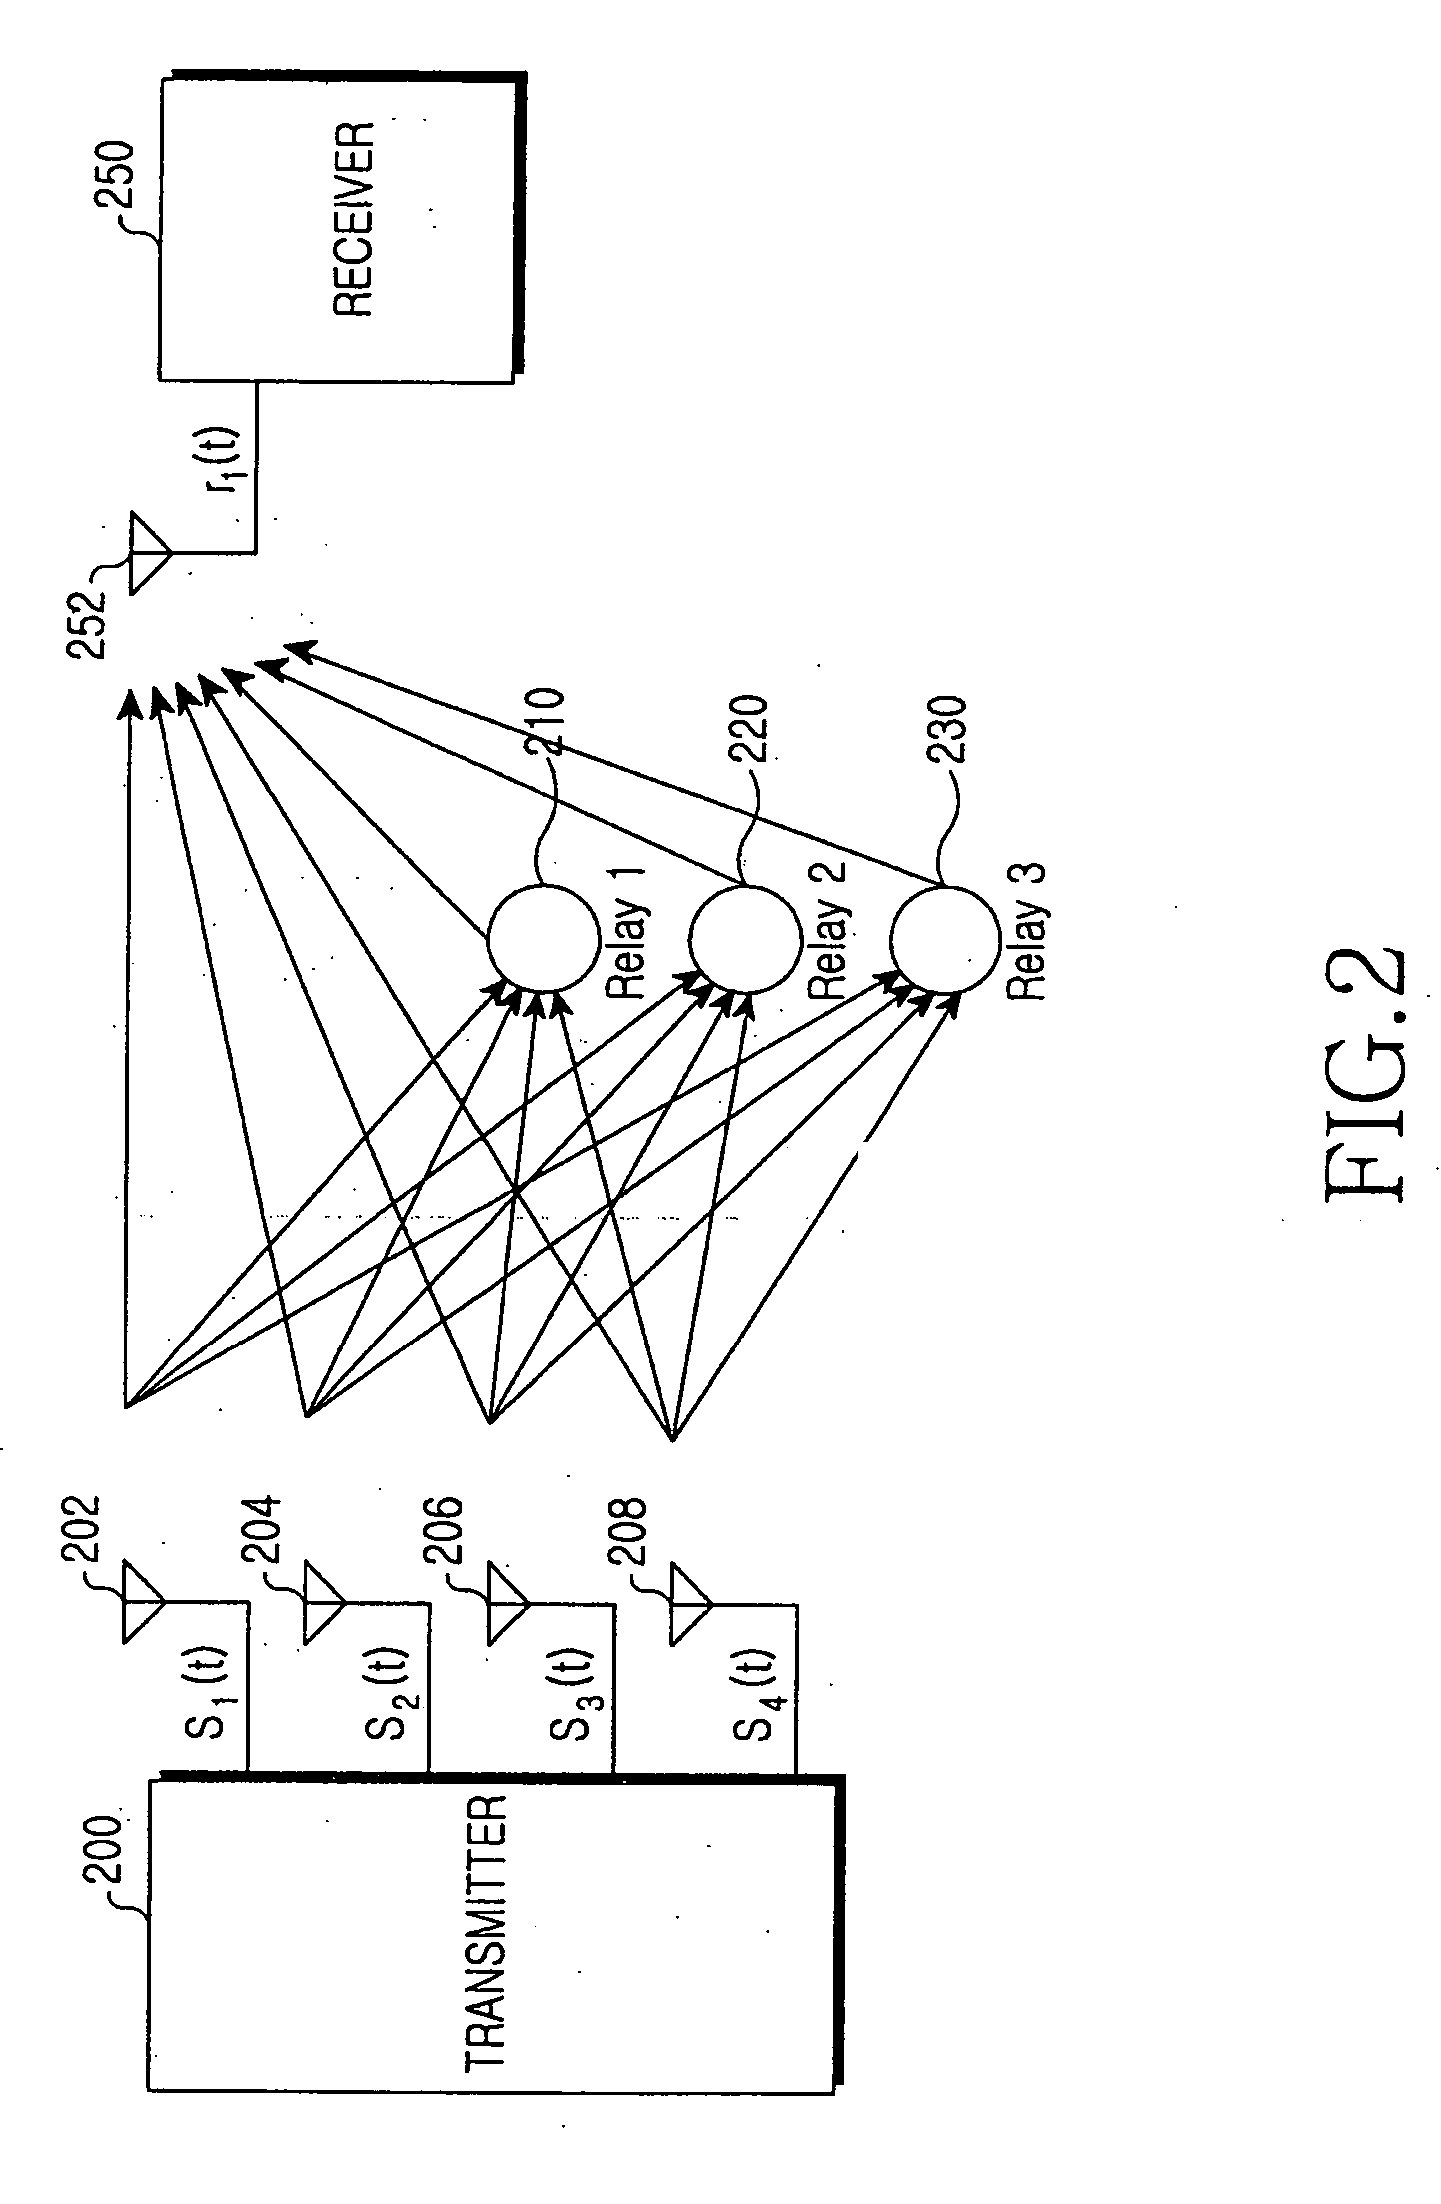 Transmitter and receiver for use in a relay network, and system and method for performing transmission and reception using the same